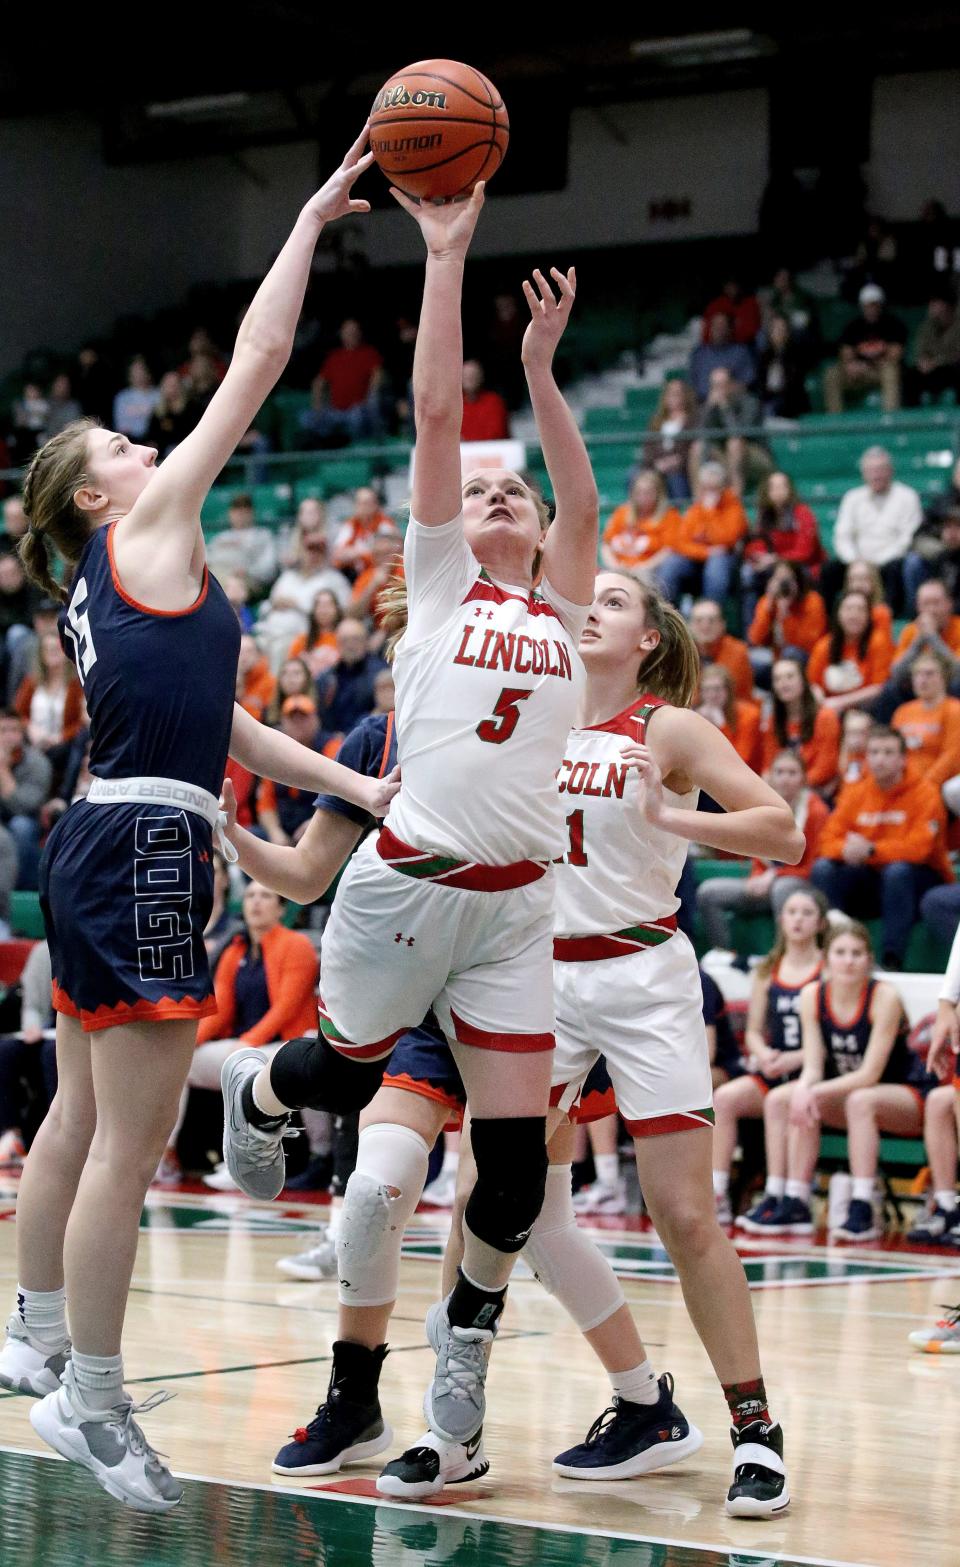 Lincoln Community High School's Kloe Frobe goes up for a shot during the game against Mahomet-Seymour High School Friday Feb. 25, 2022. [Thomas J. Turney/ The State Journal-Register]